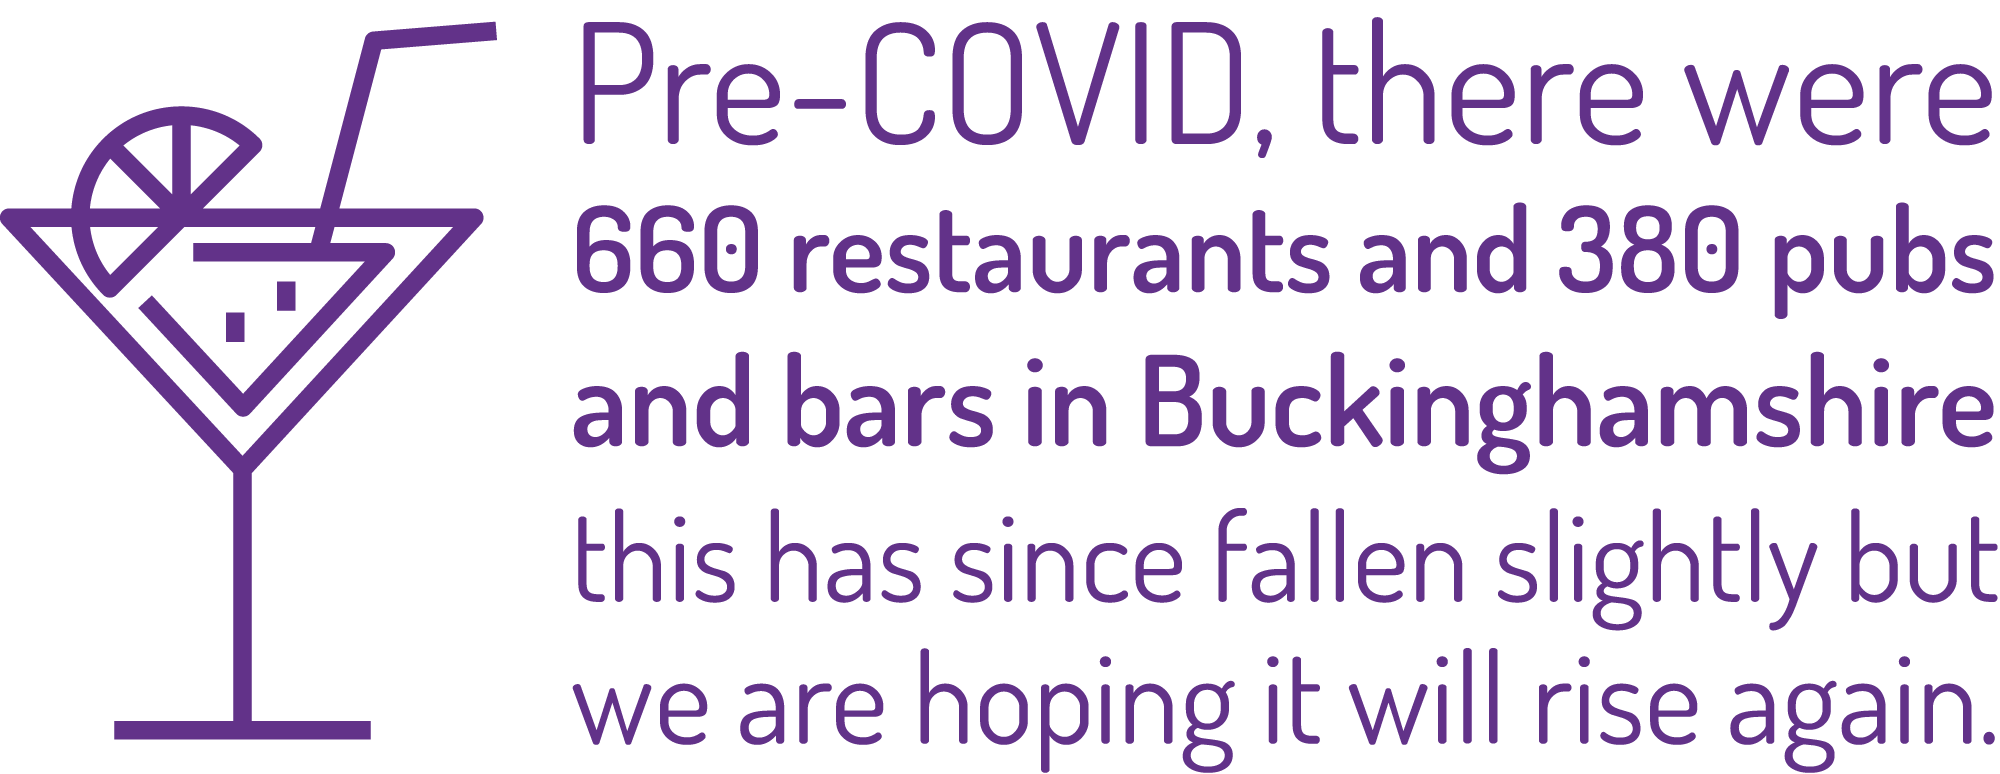 Pre-COVID, there were 660 resturants and 380 pubs and bars in Buckinghamshire this has since fallen slightly but we are hoping it will rise again.